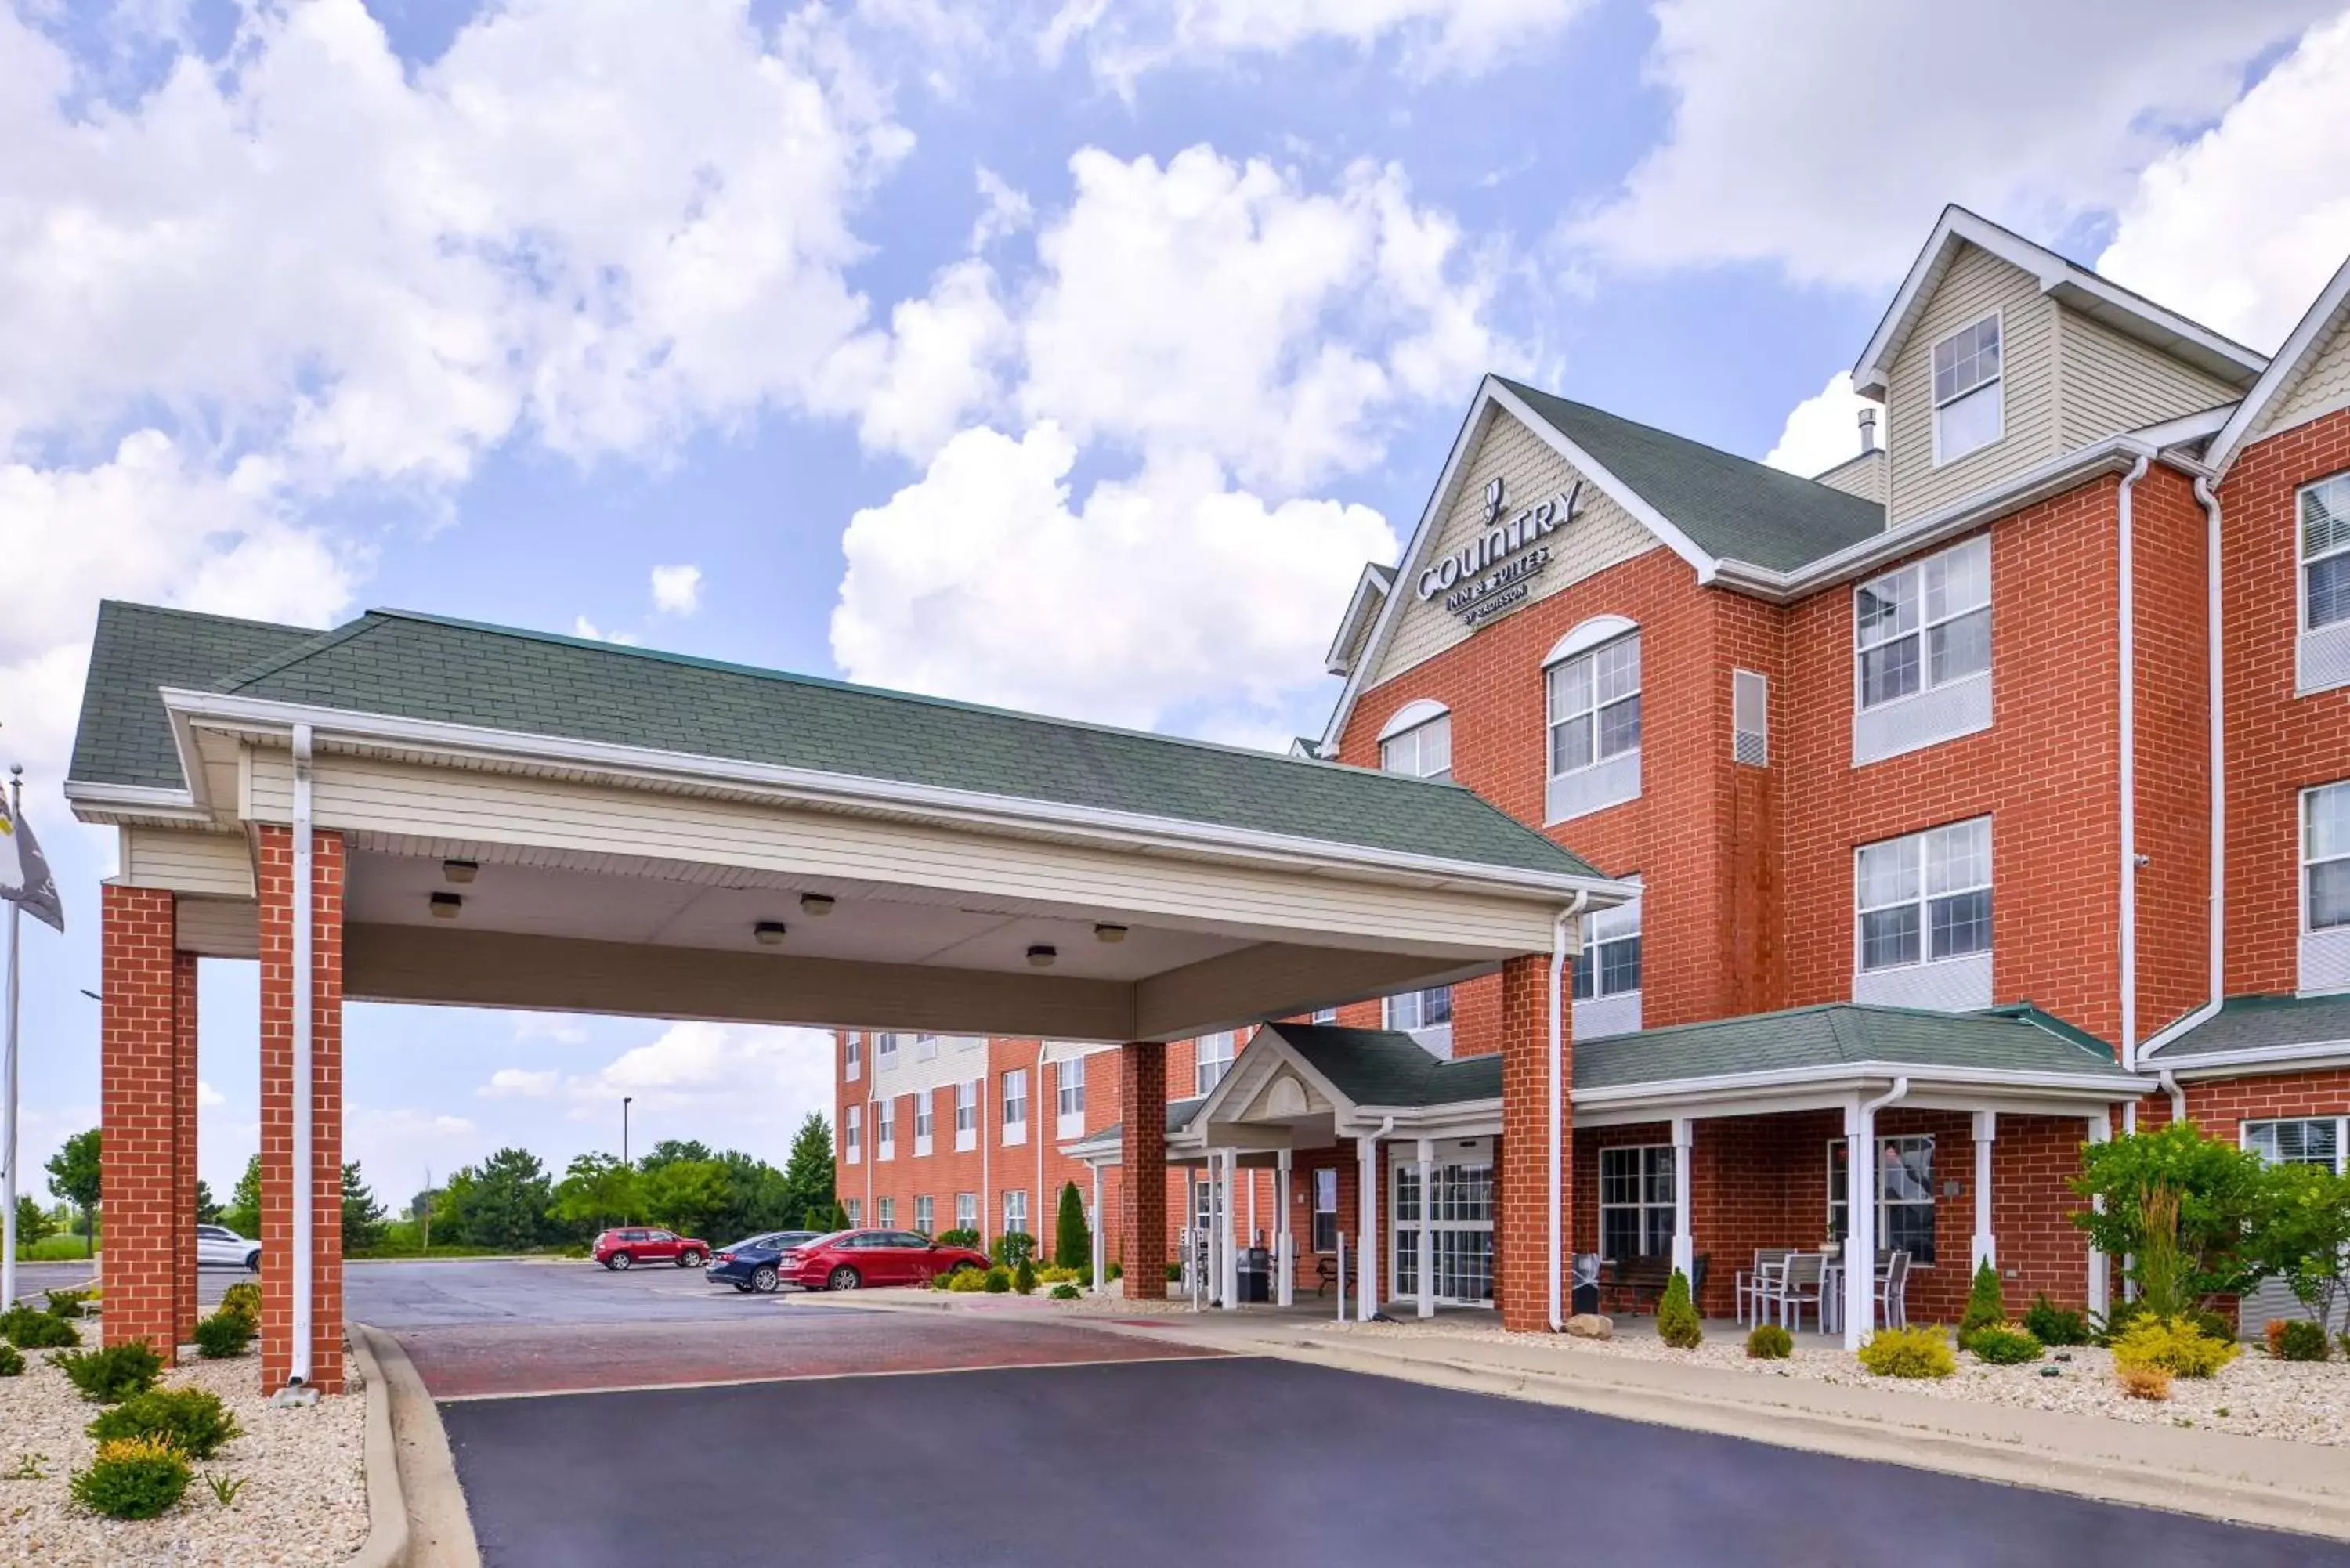 Property building in Country Inn & Suites by Radisson, Tinley Park, IL